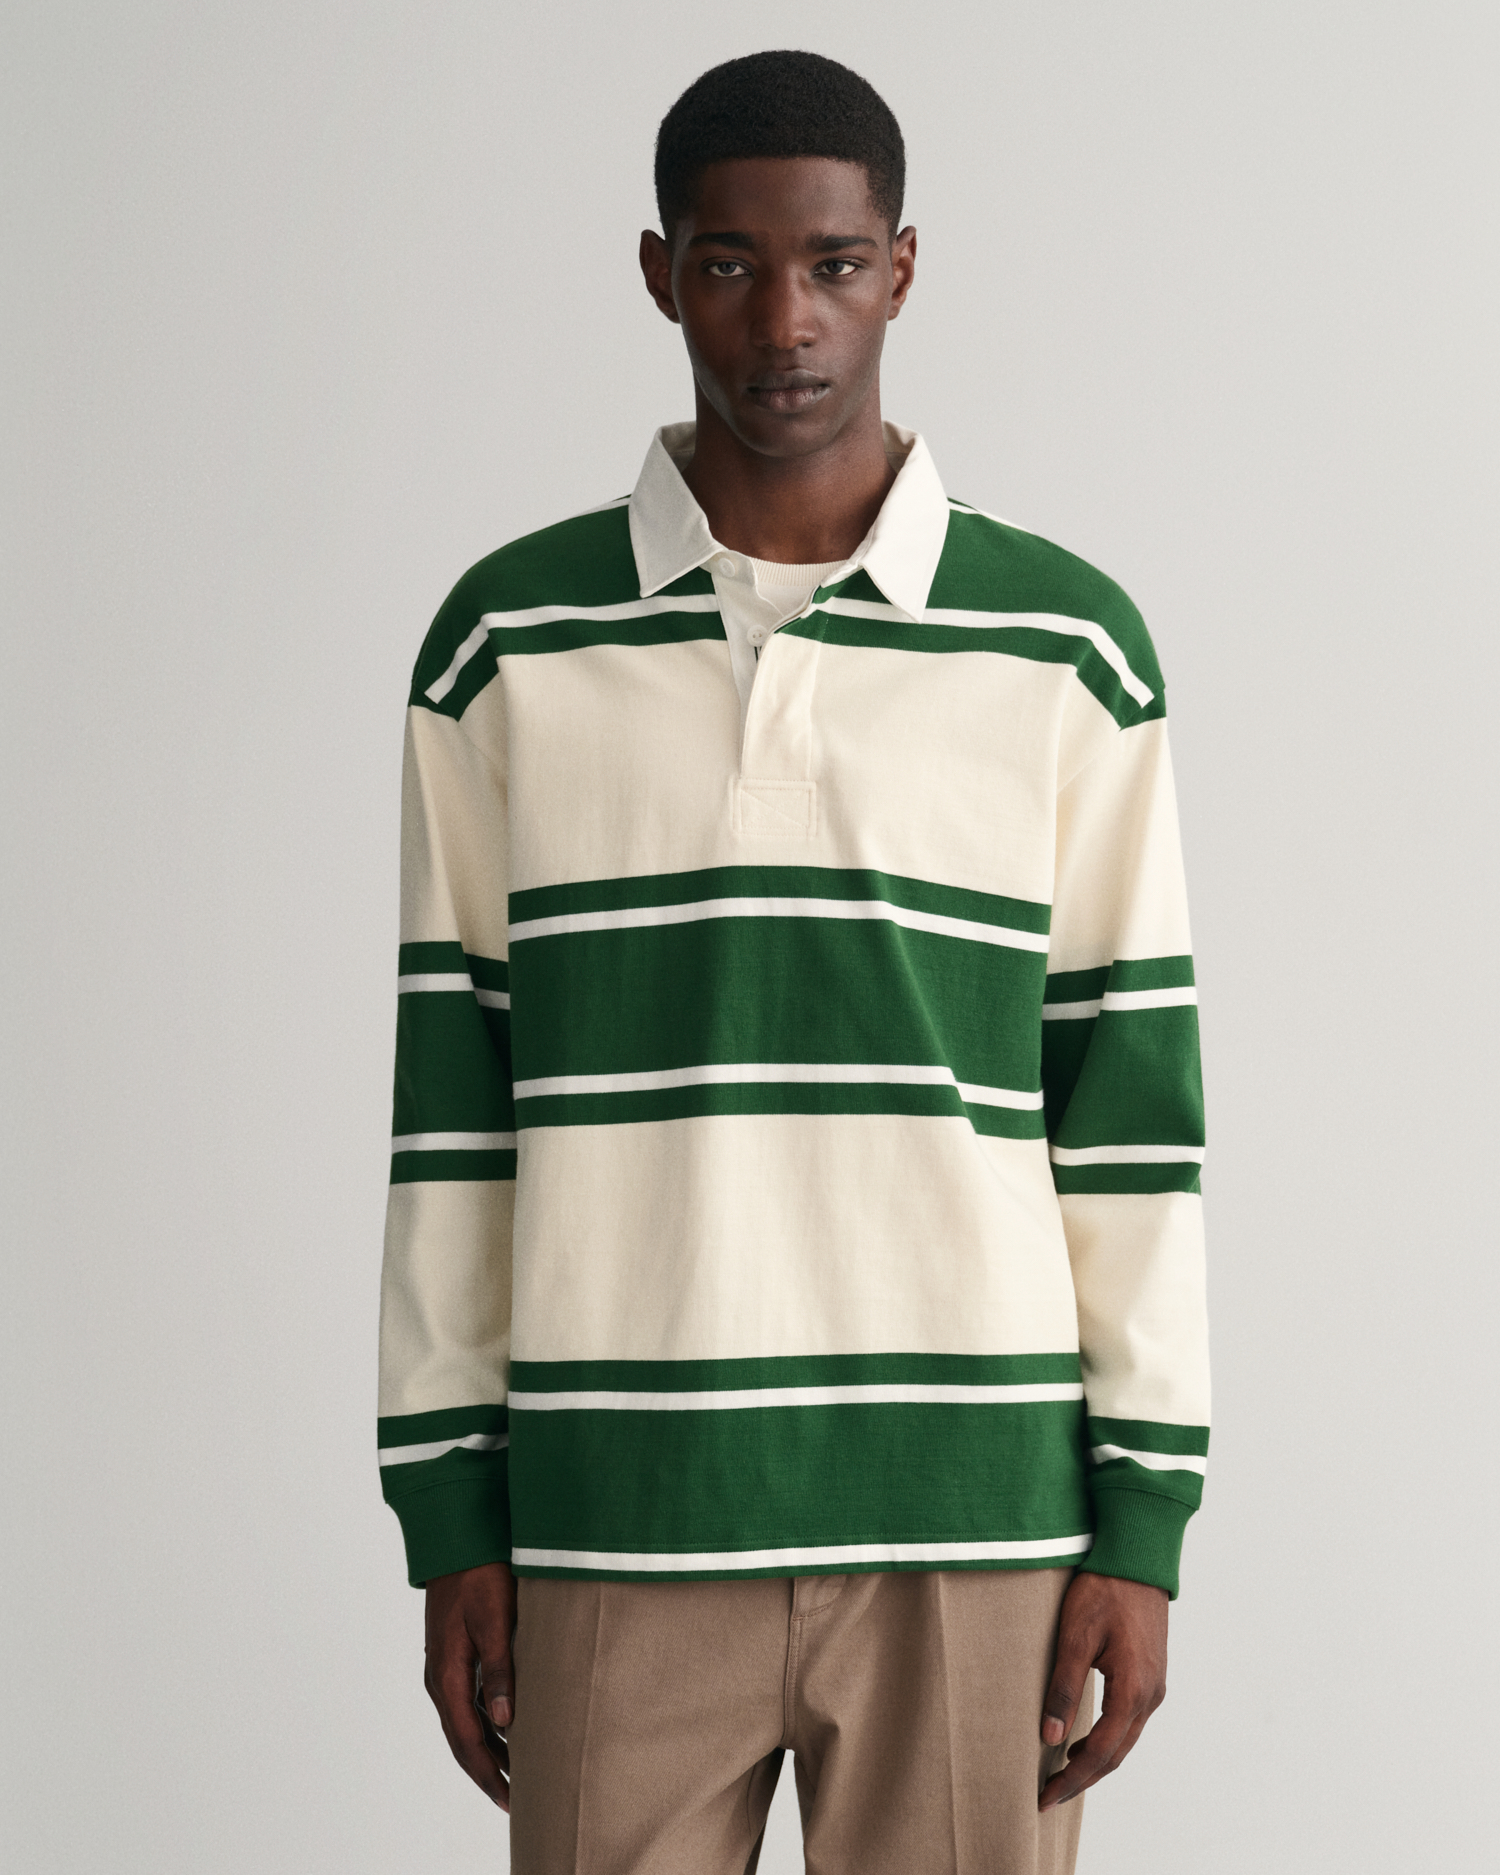 GANT - The Heavy Rugger is a GANT icon, and for good reason. Fall